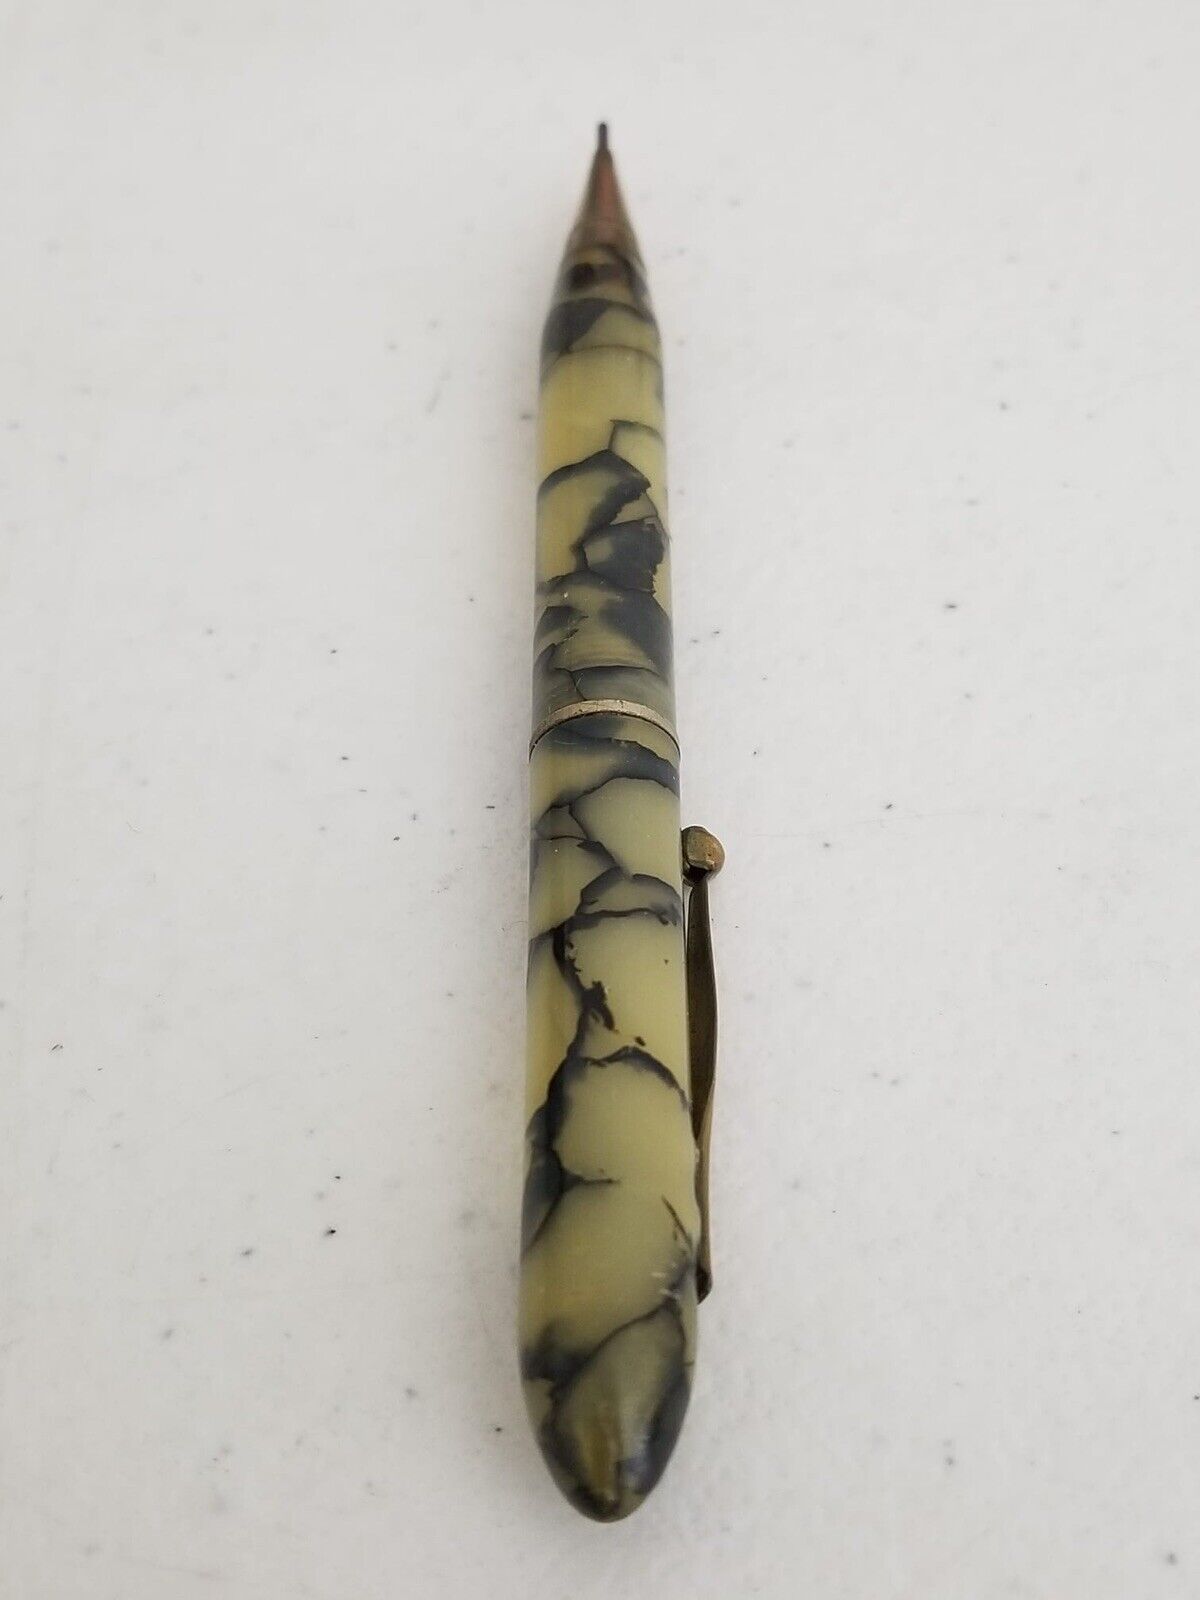 Vintage Drexel Marble Mechanical Pencil with Gold Tone Accents - Classic Writing Collectible - TreasuTiques